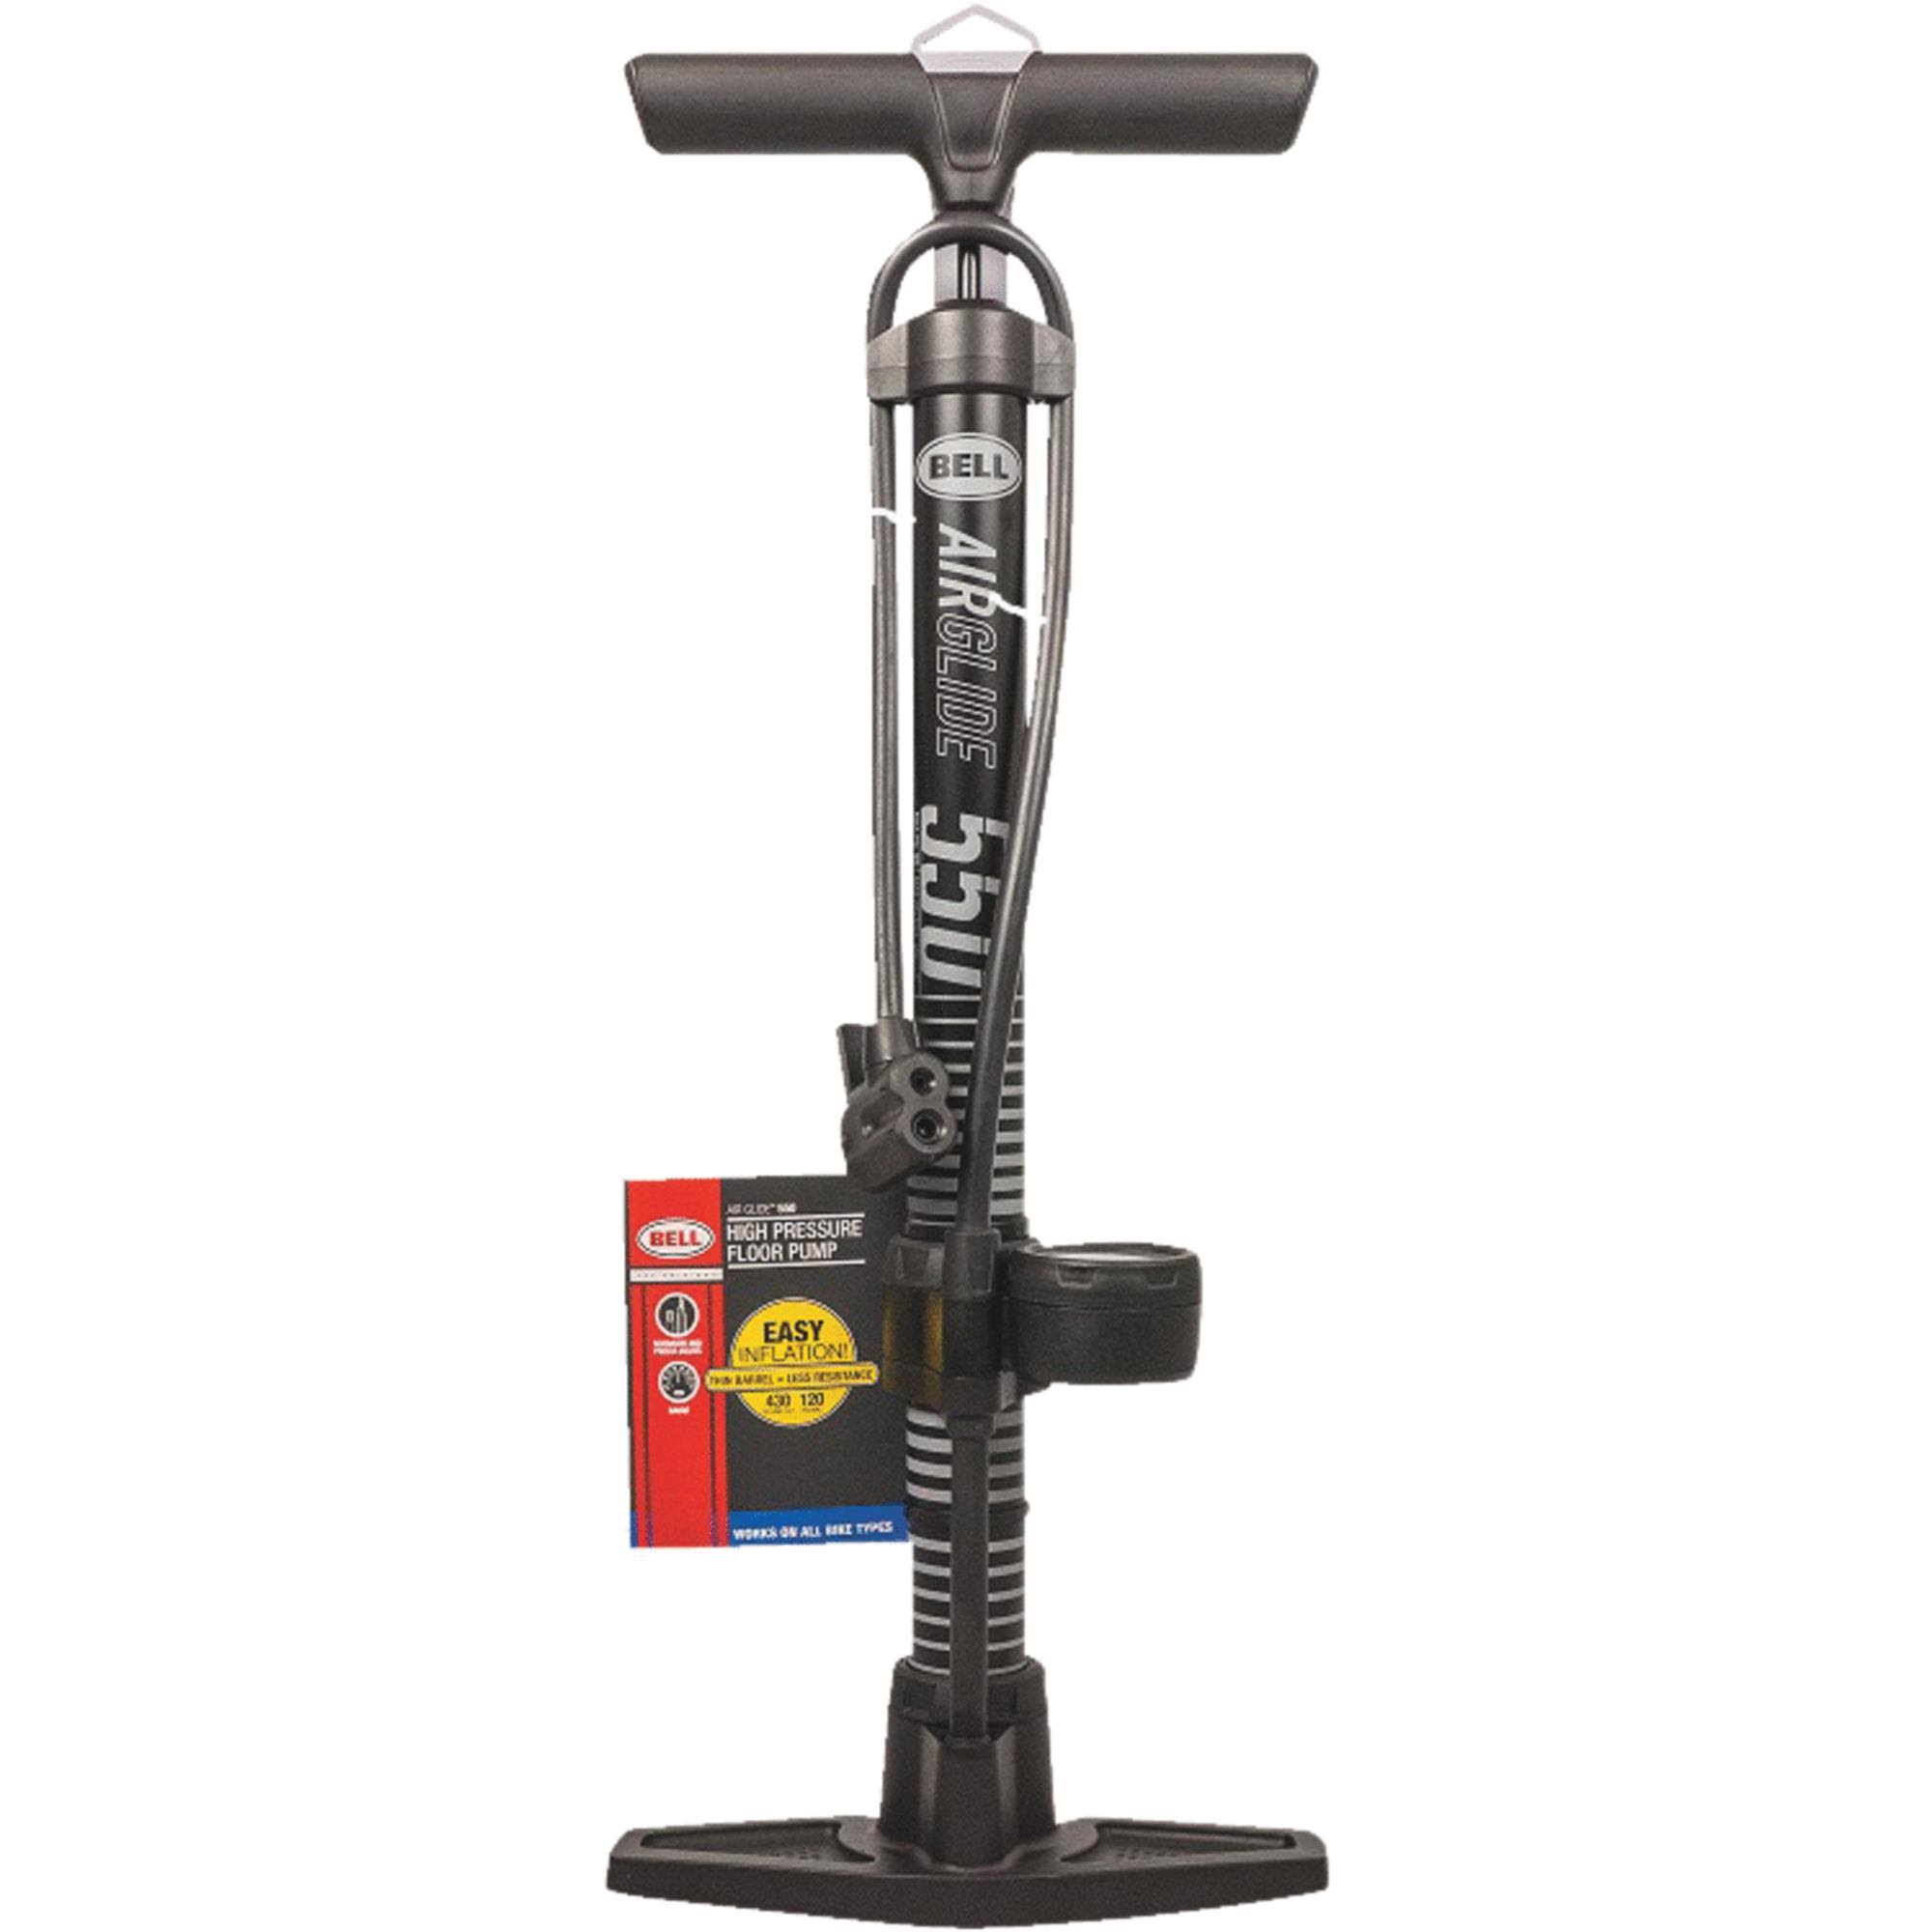 Bell Sports Air Attack 500 Floor Bicycle Pump - Black, 120 PSI